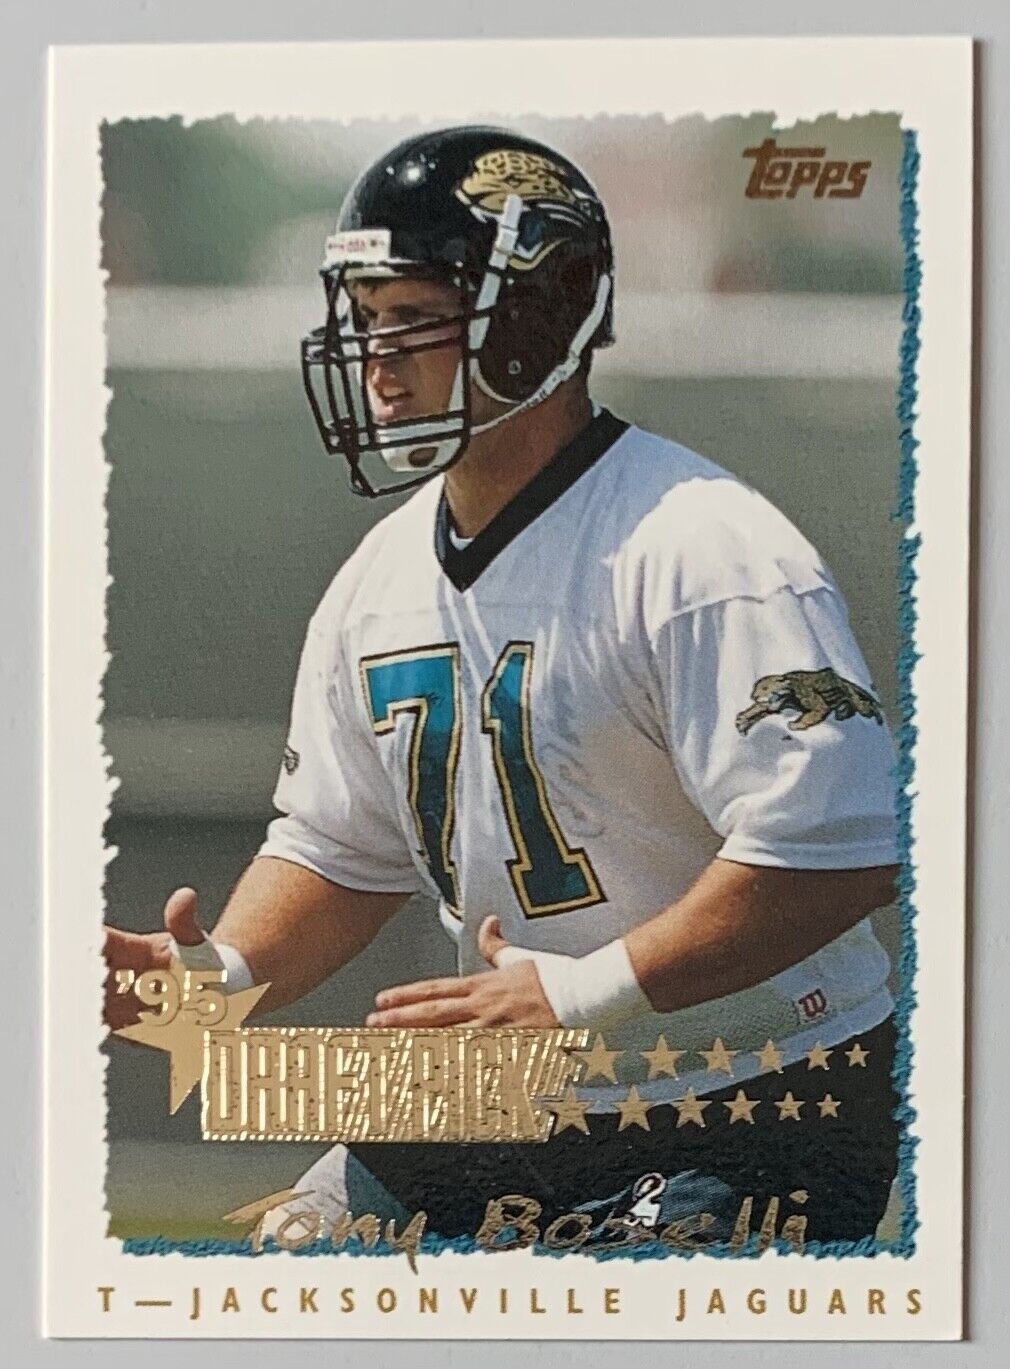 TONY BOSELLI, 1995 TOPPS ROOKIE CARD, NFL SUPERSTAR !. rookie card picture